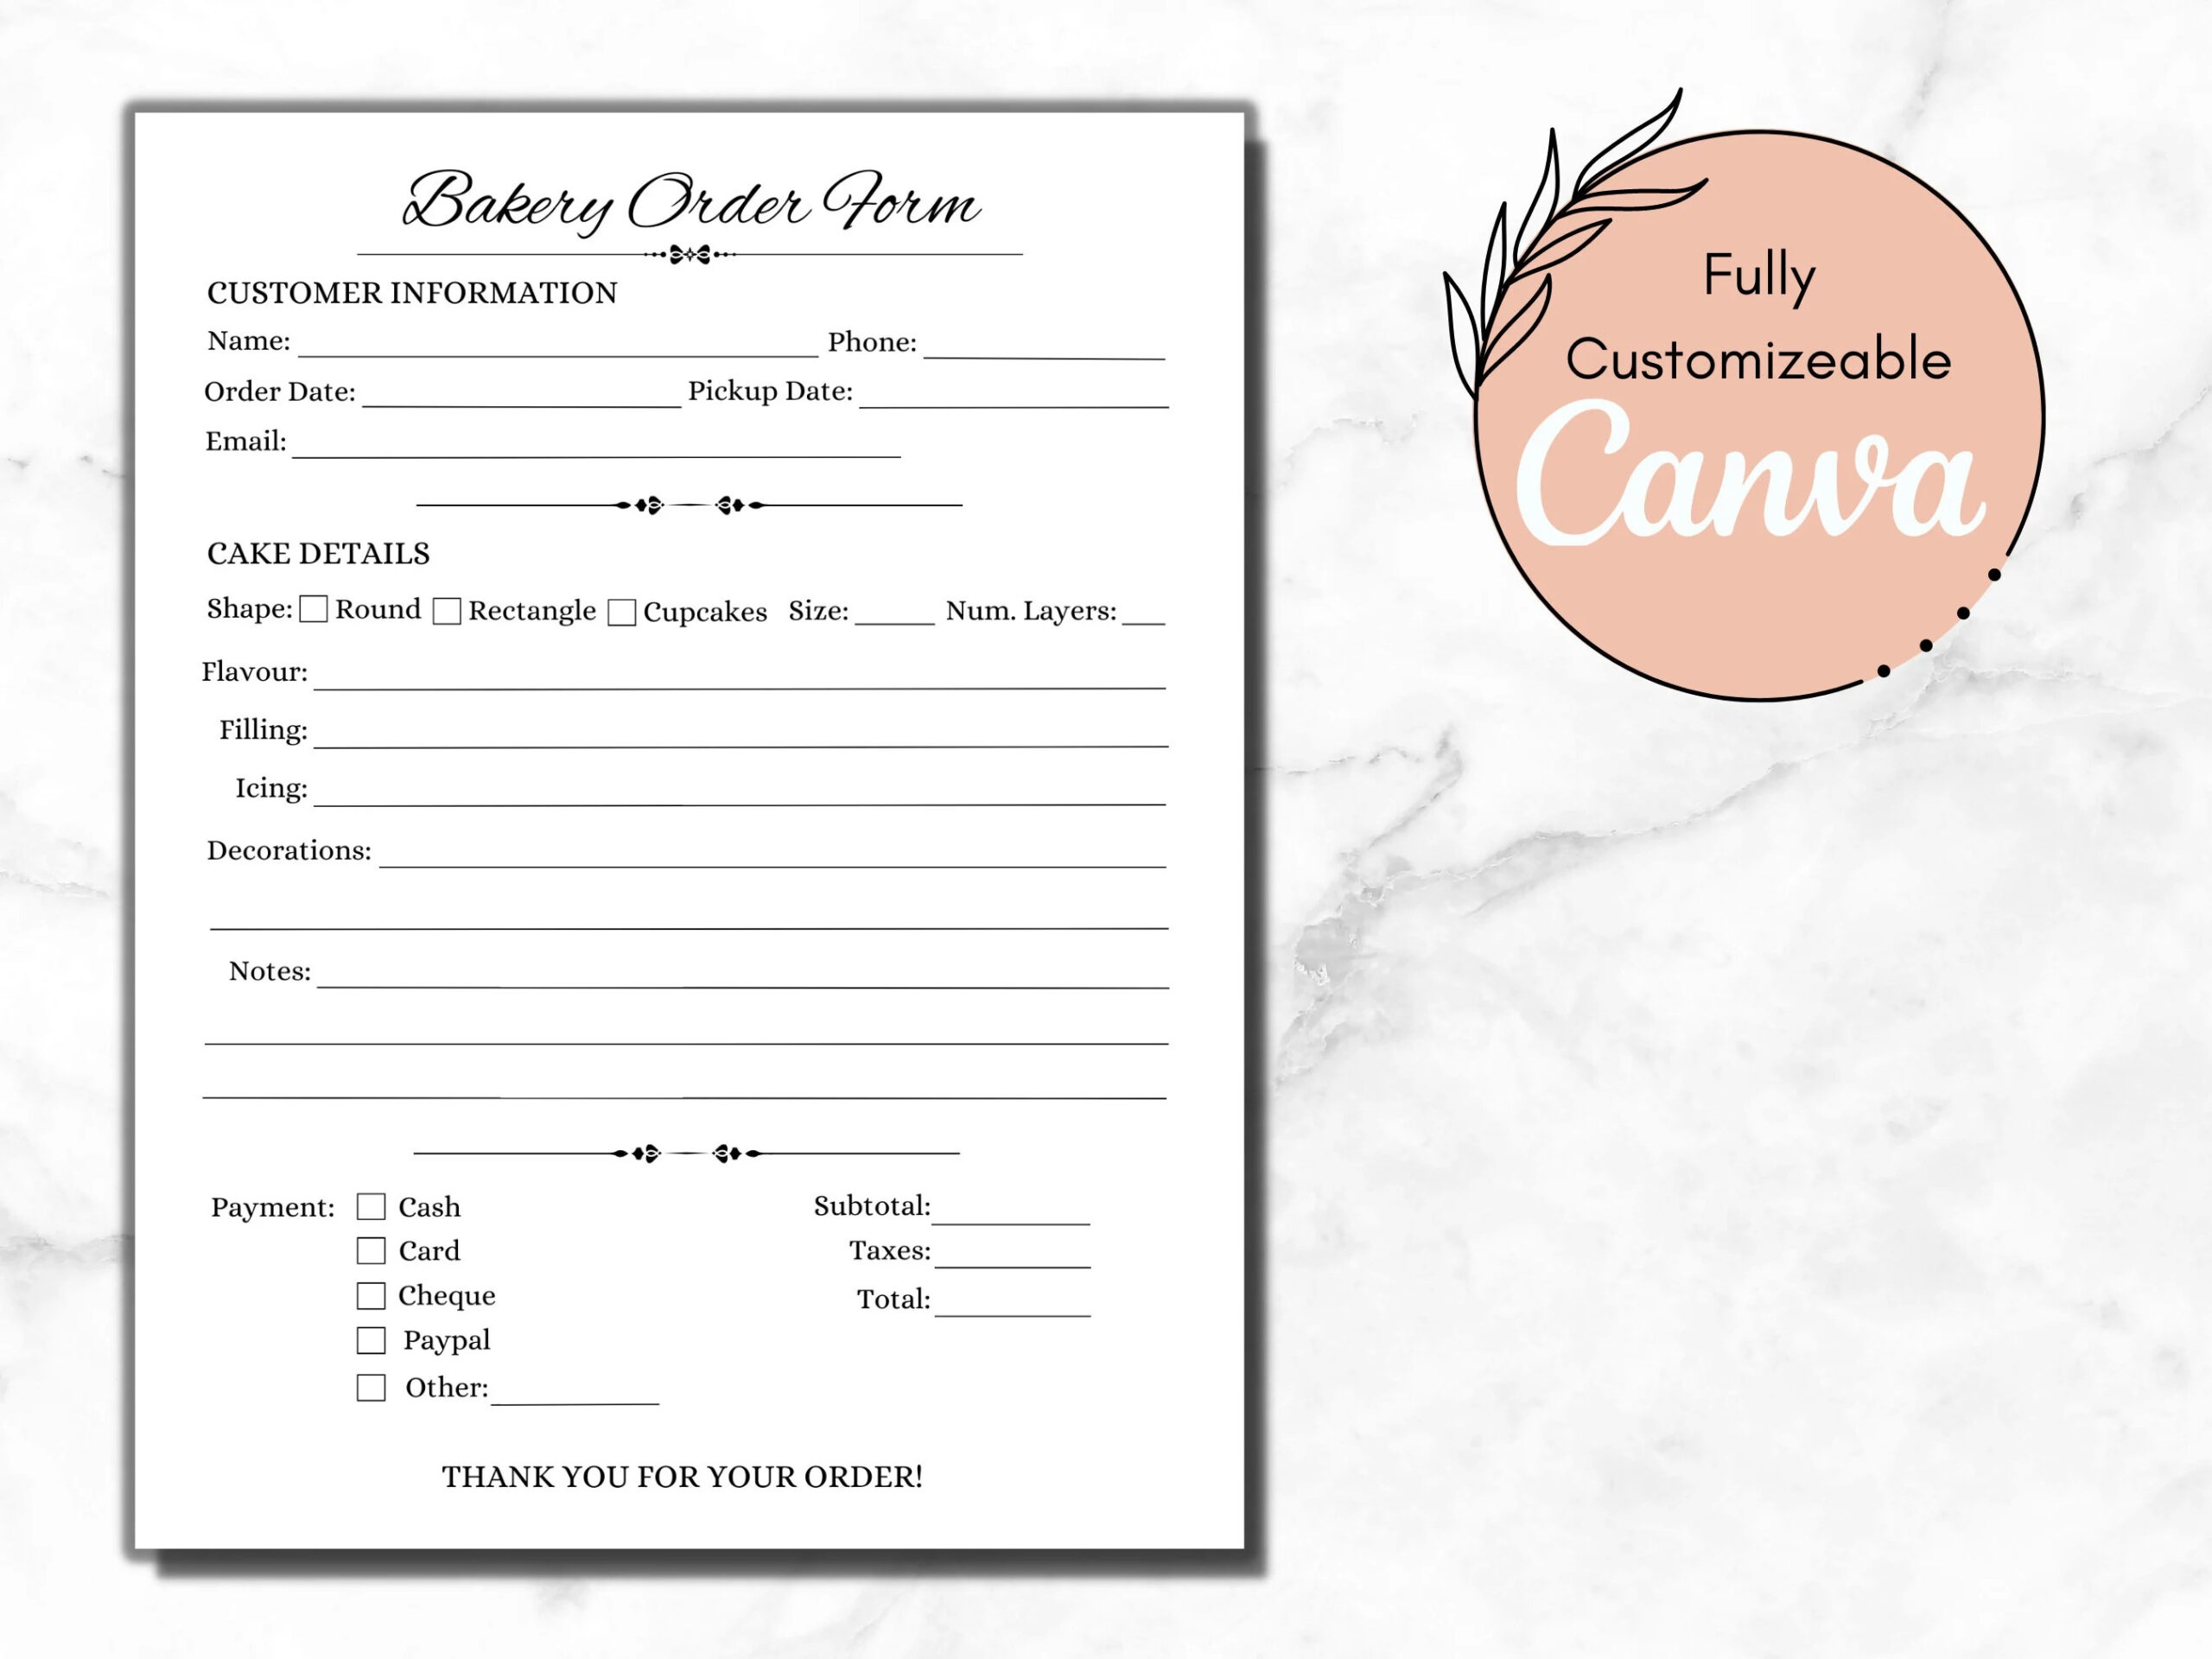 Bakery Order Form Template Free - Free Printable Bakery Order Forms